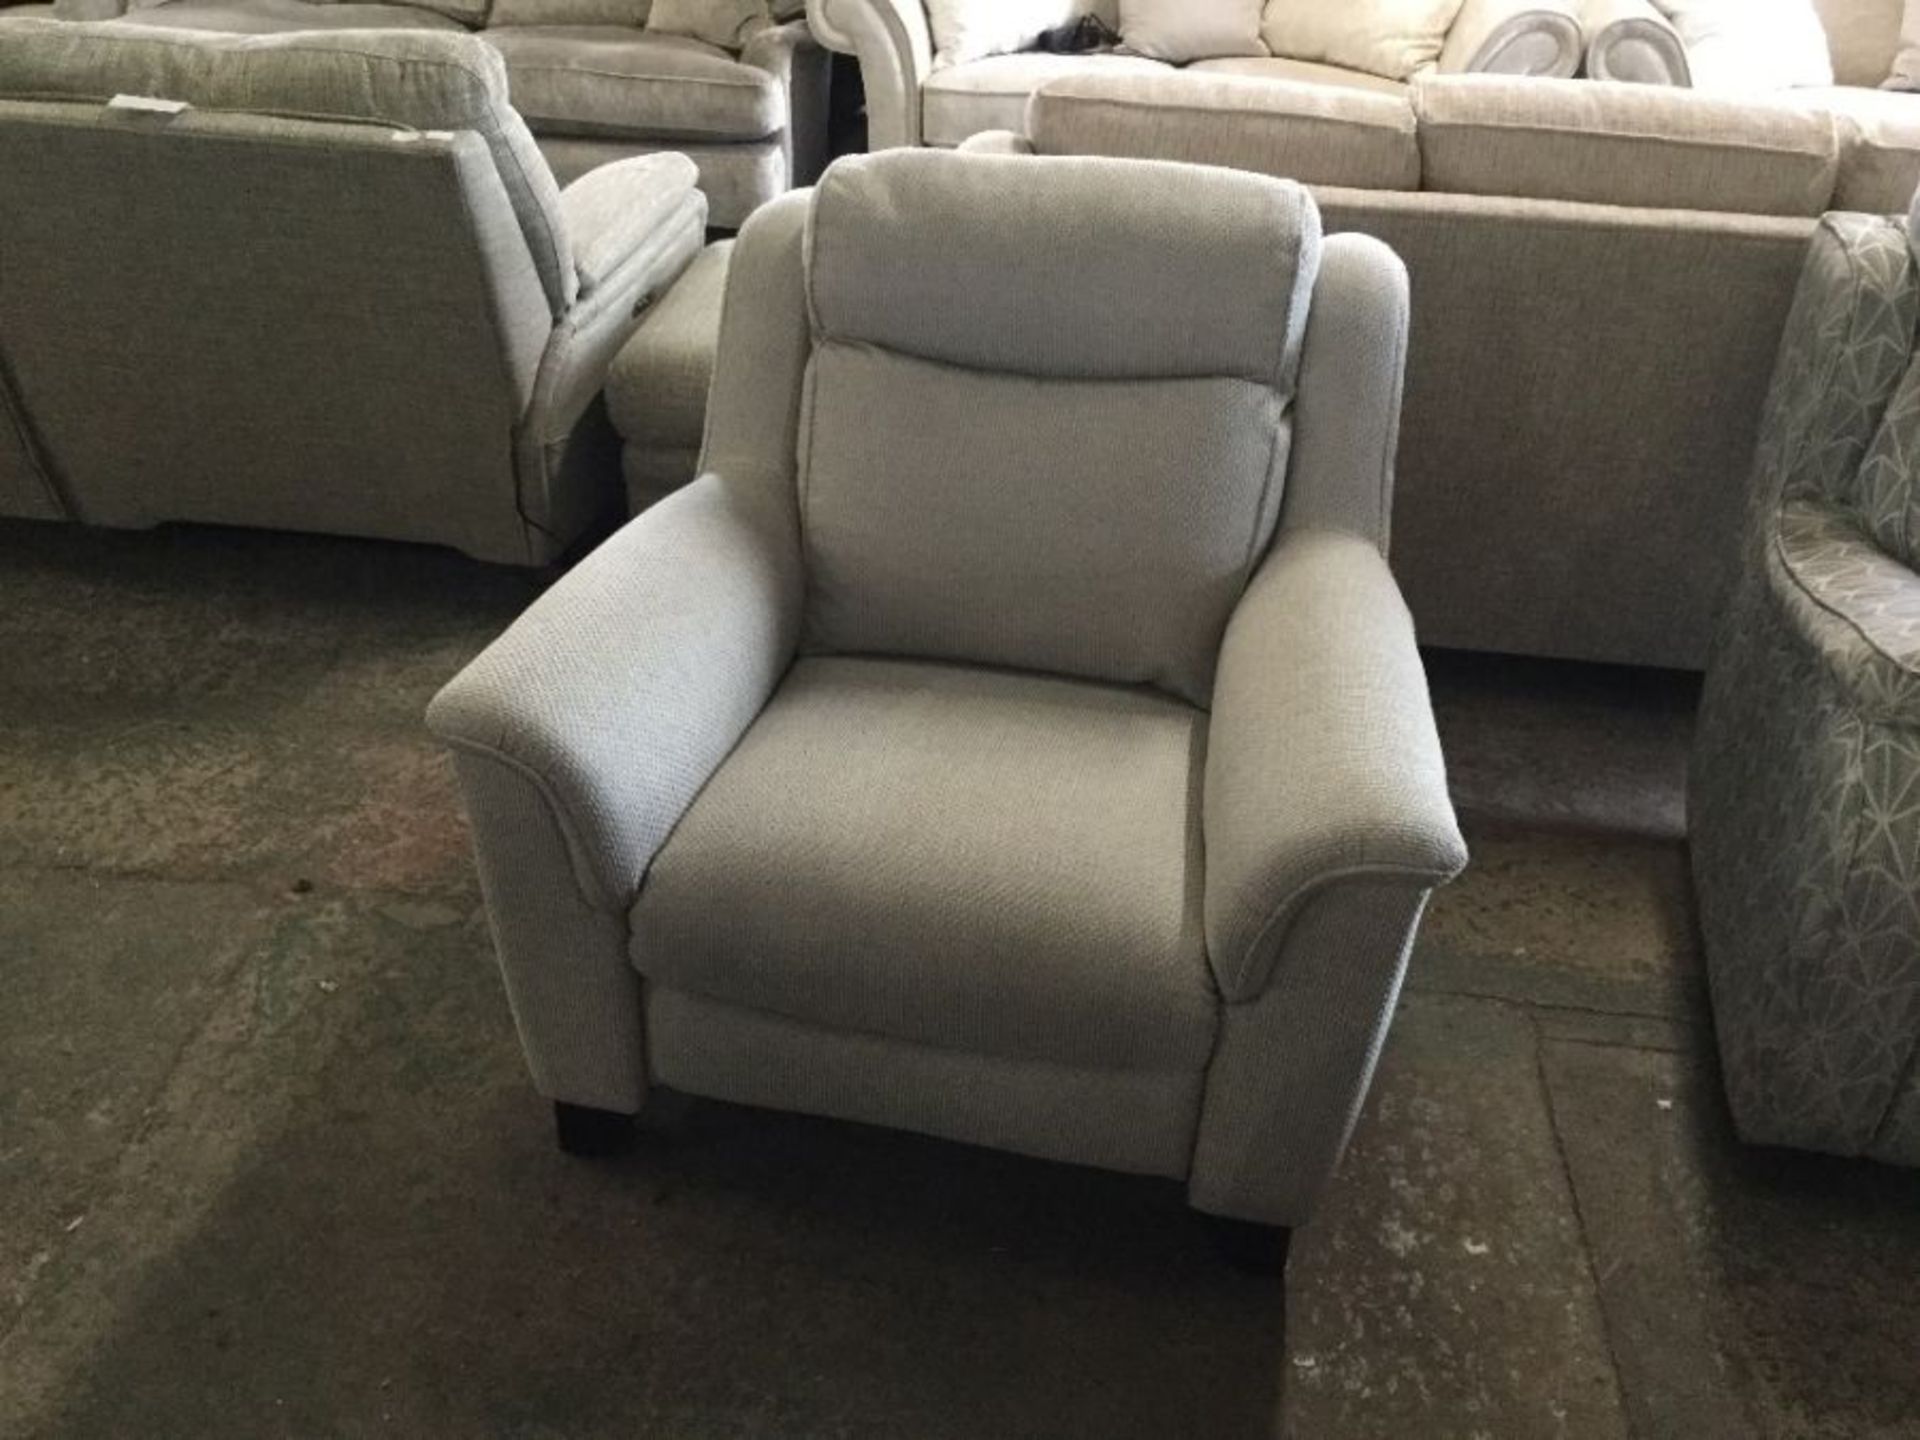 GREEN AND SILVER ELECTRIC RECLINING CHAIR (P17-WO1